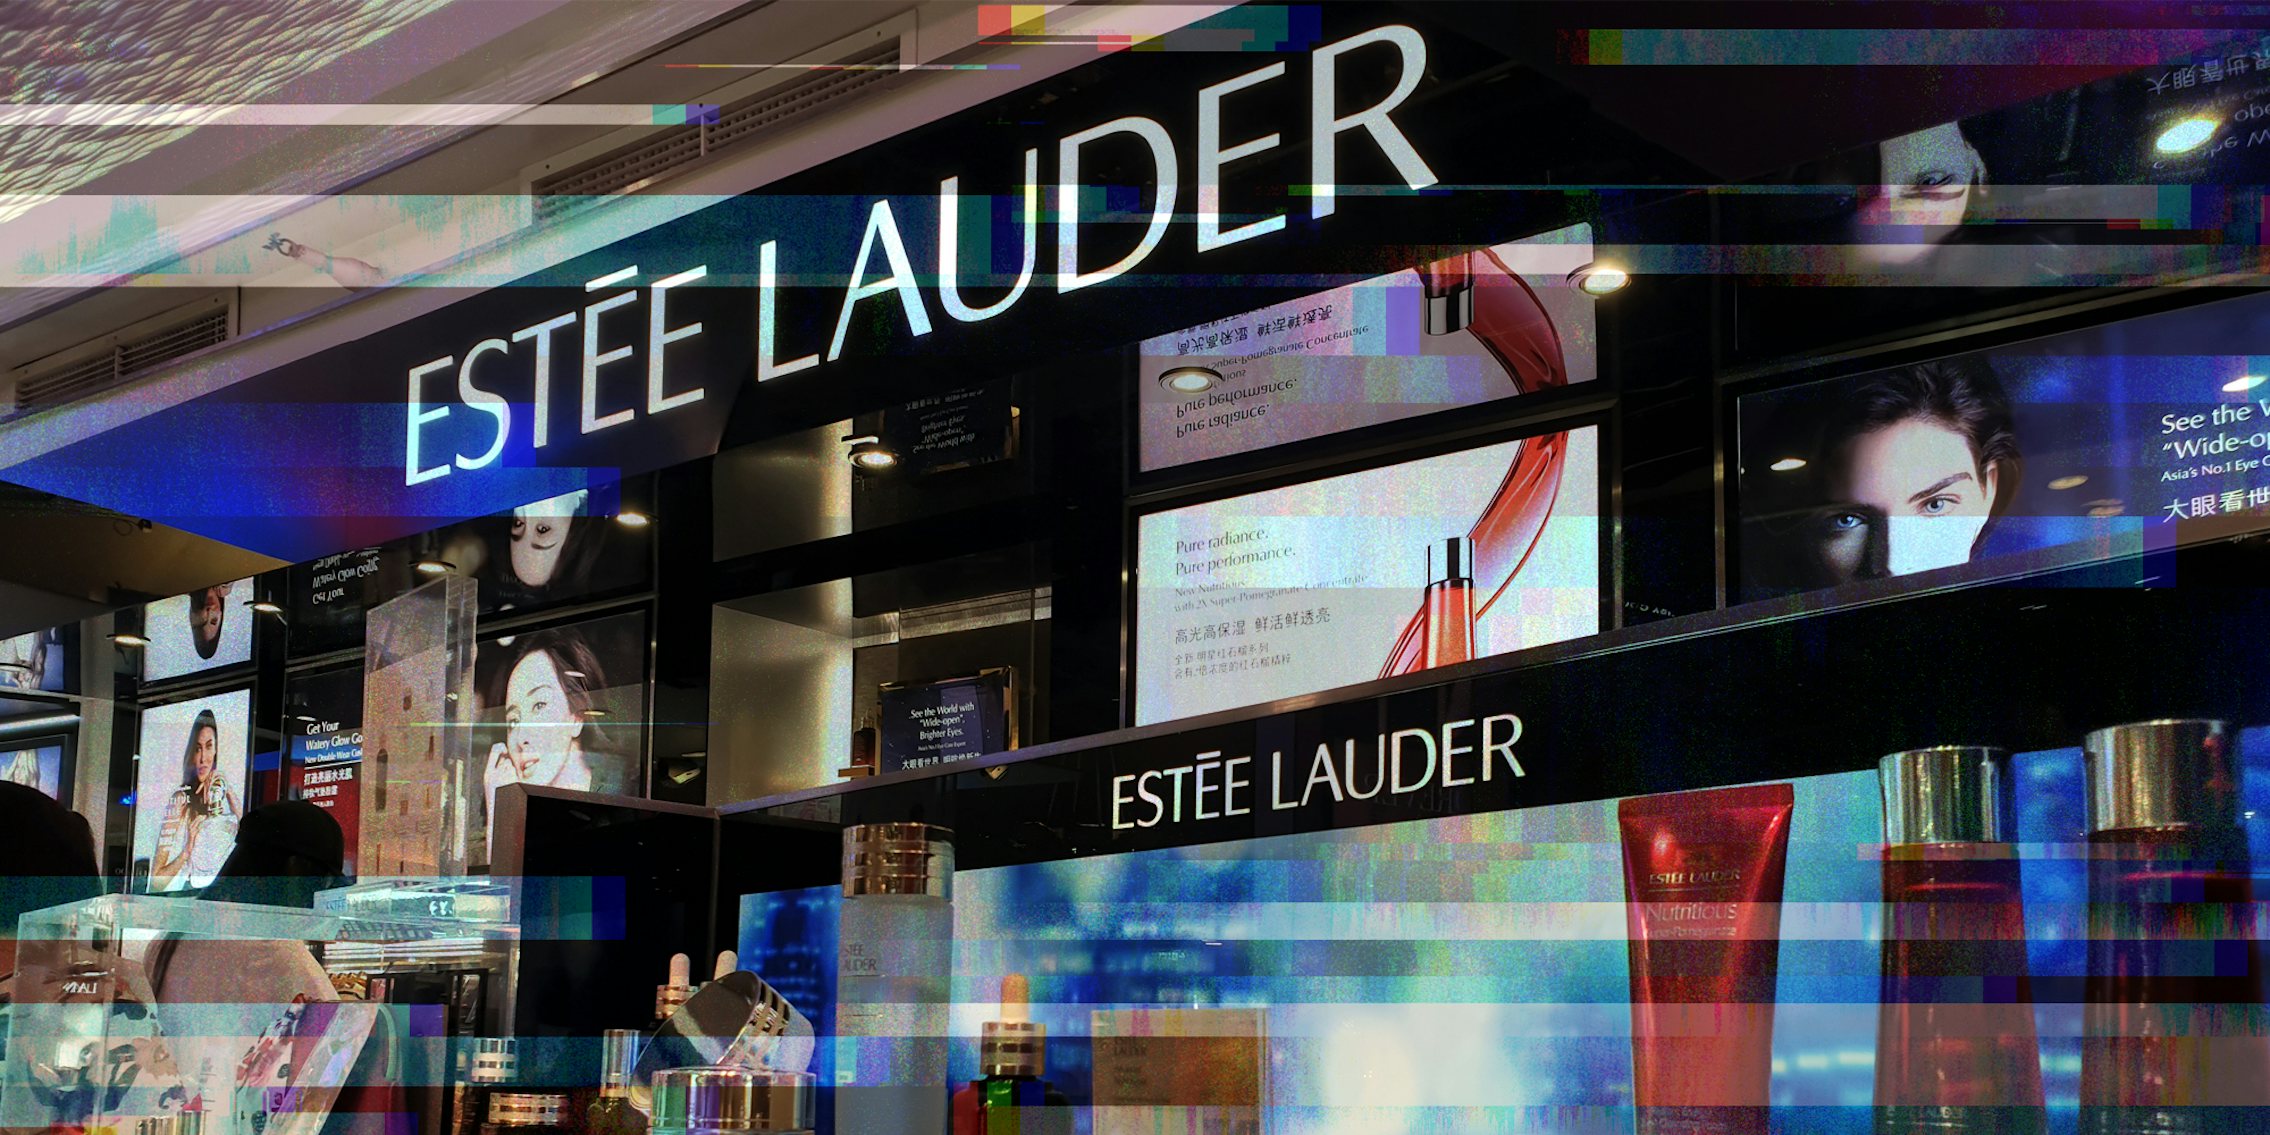 Estee Lauder interior with products on display and signs with glitch cyber overlay